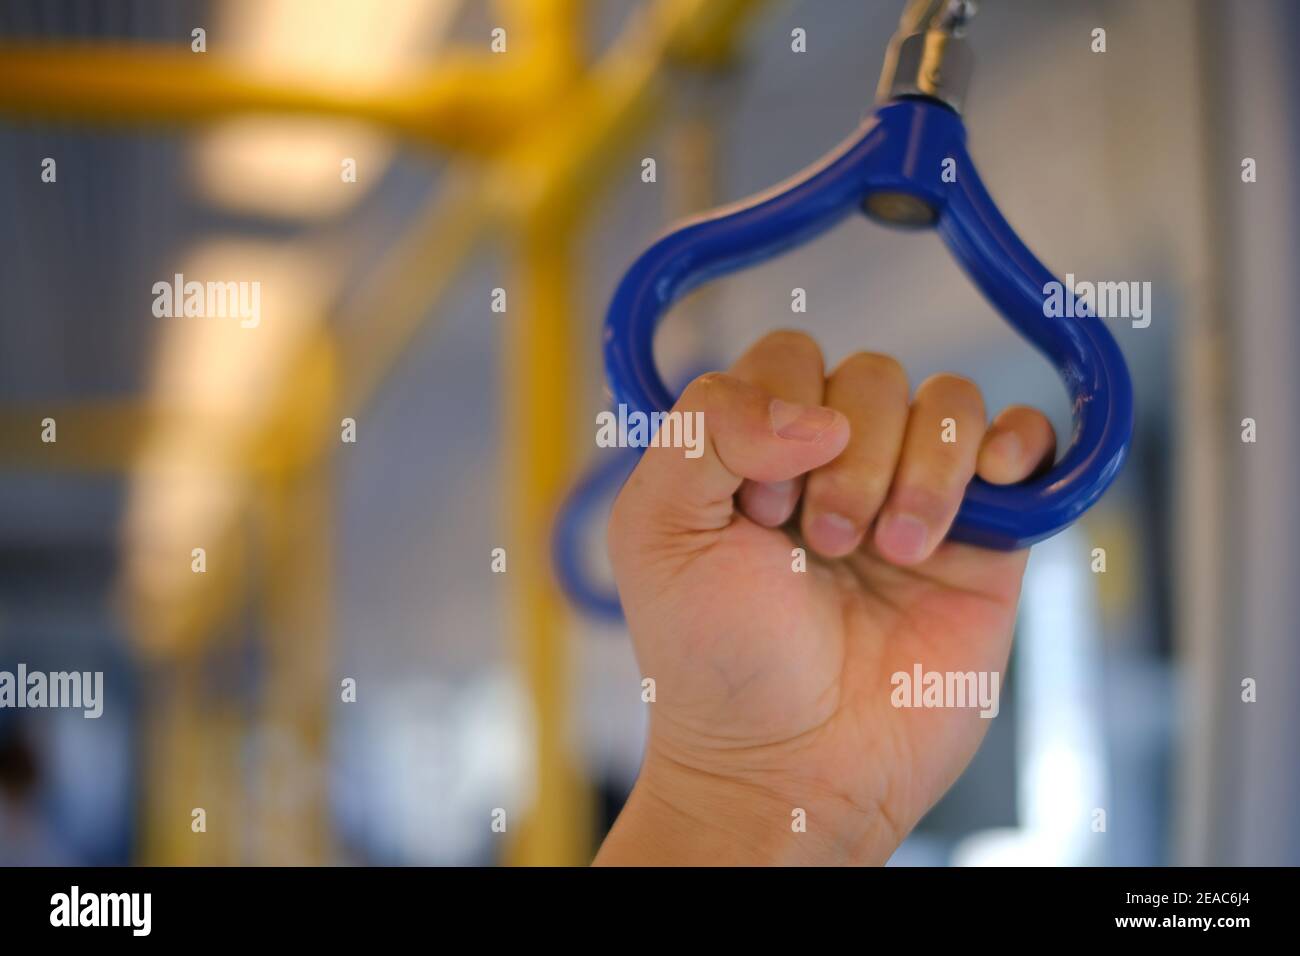 A hand grabbing a blue handgrip for stability on a sky train, traveling a highspeed. Stock Photo